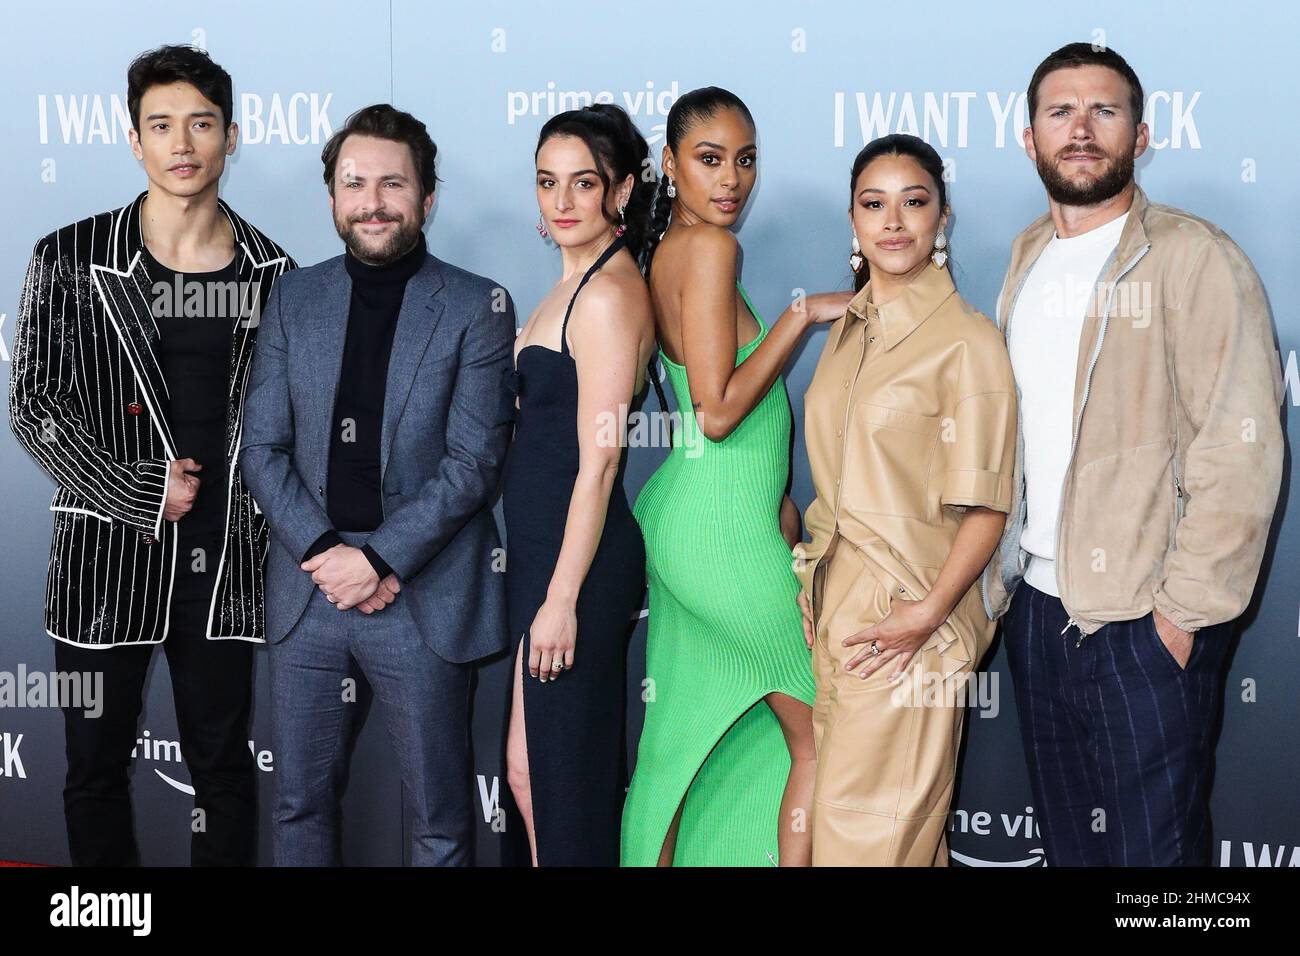 Los Angeles, United States. 08th Feb, 2022. LOS ANGELES, CALIFORNIA, USA - FEBRUARY 08: Actors Manny Jacinto, Charlie Day, Jenny Slate, Clark Backo, Gina Rodriguez and Scott Eastwood arrive at the Los Angeles Premiere Of Amazon Prime's 'I Want You Back' held at ROW DTLA on February 8, 2022 in Los Angeles, California, United States. (Photo by Xavier Collin/Image Press Agency) Credit: Image Press Agency/Alamy Live News Stock Photo